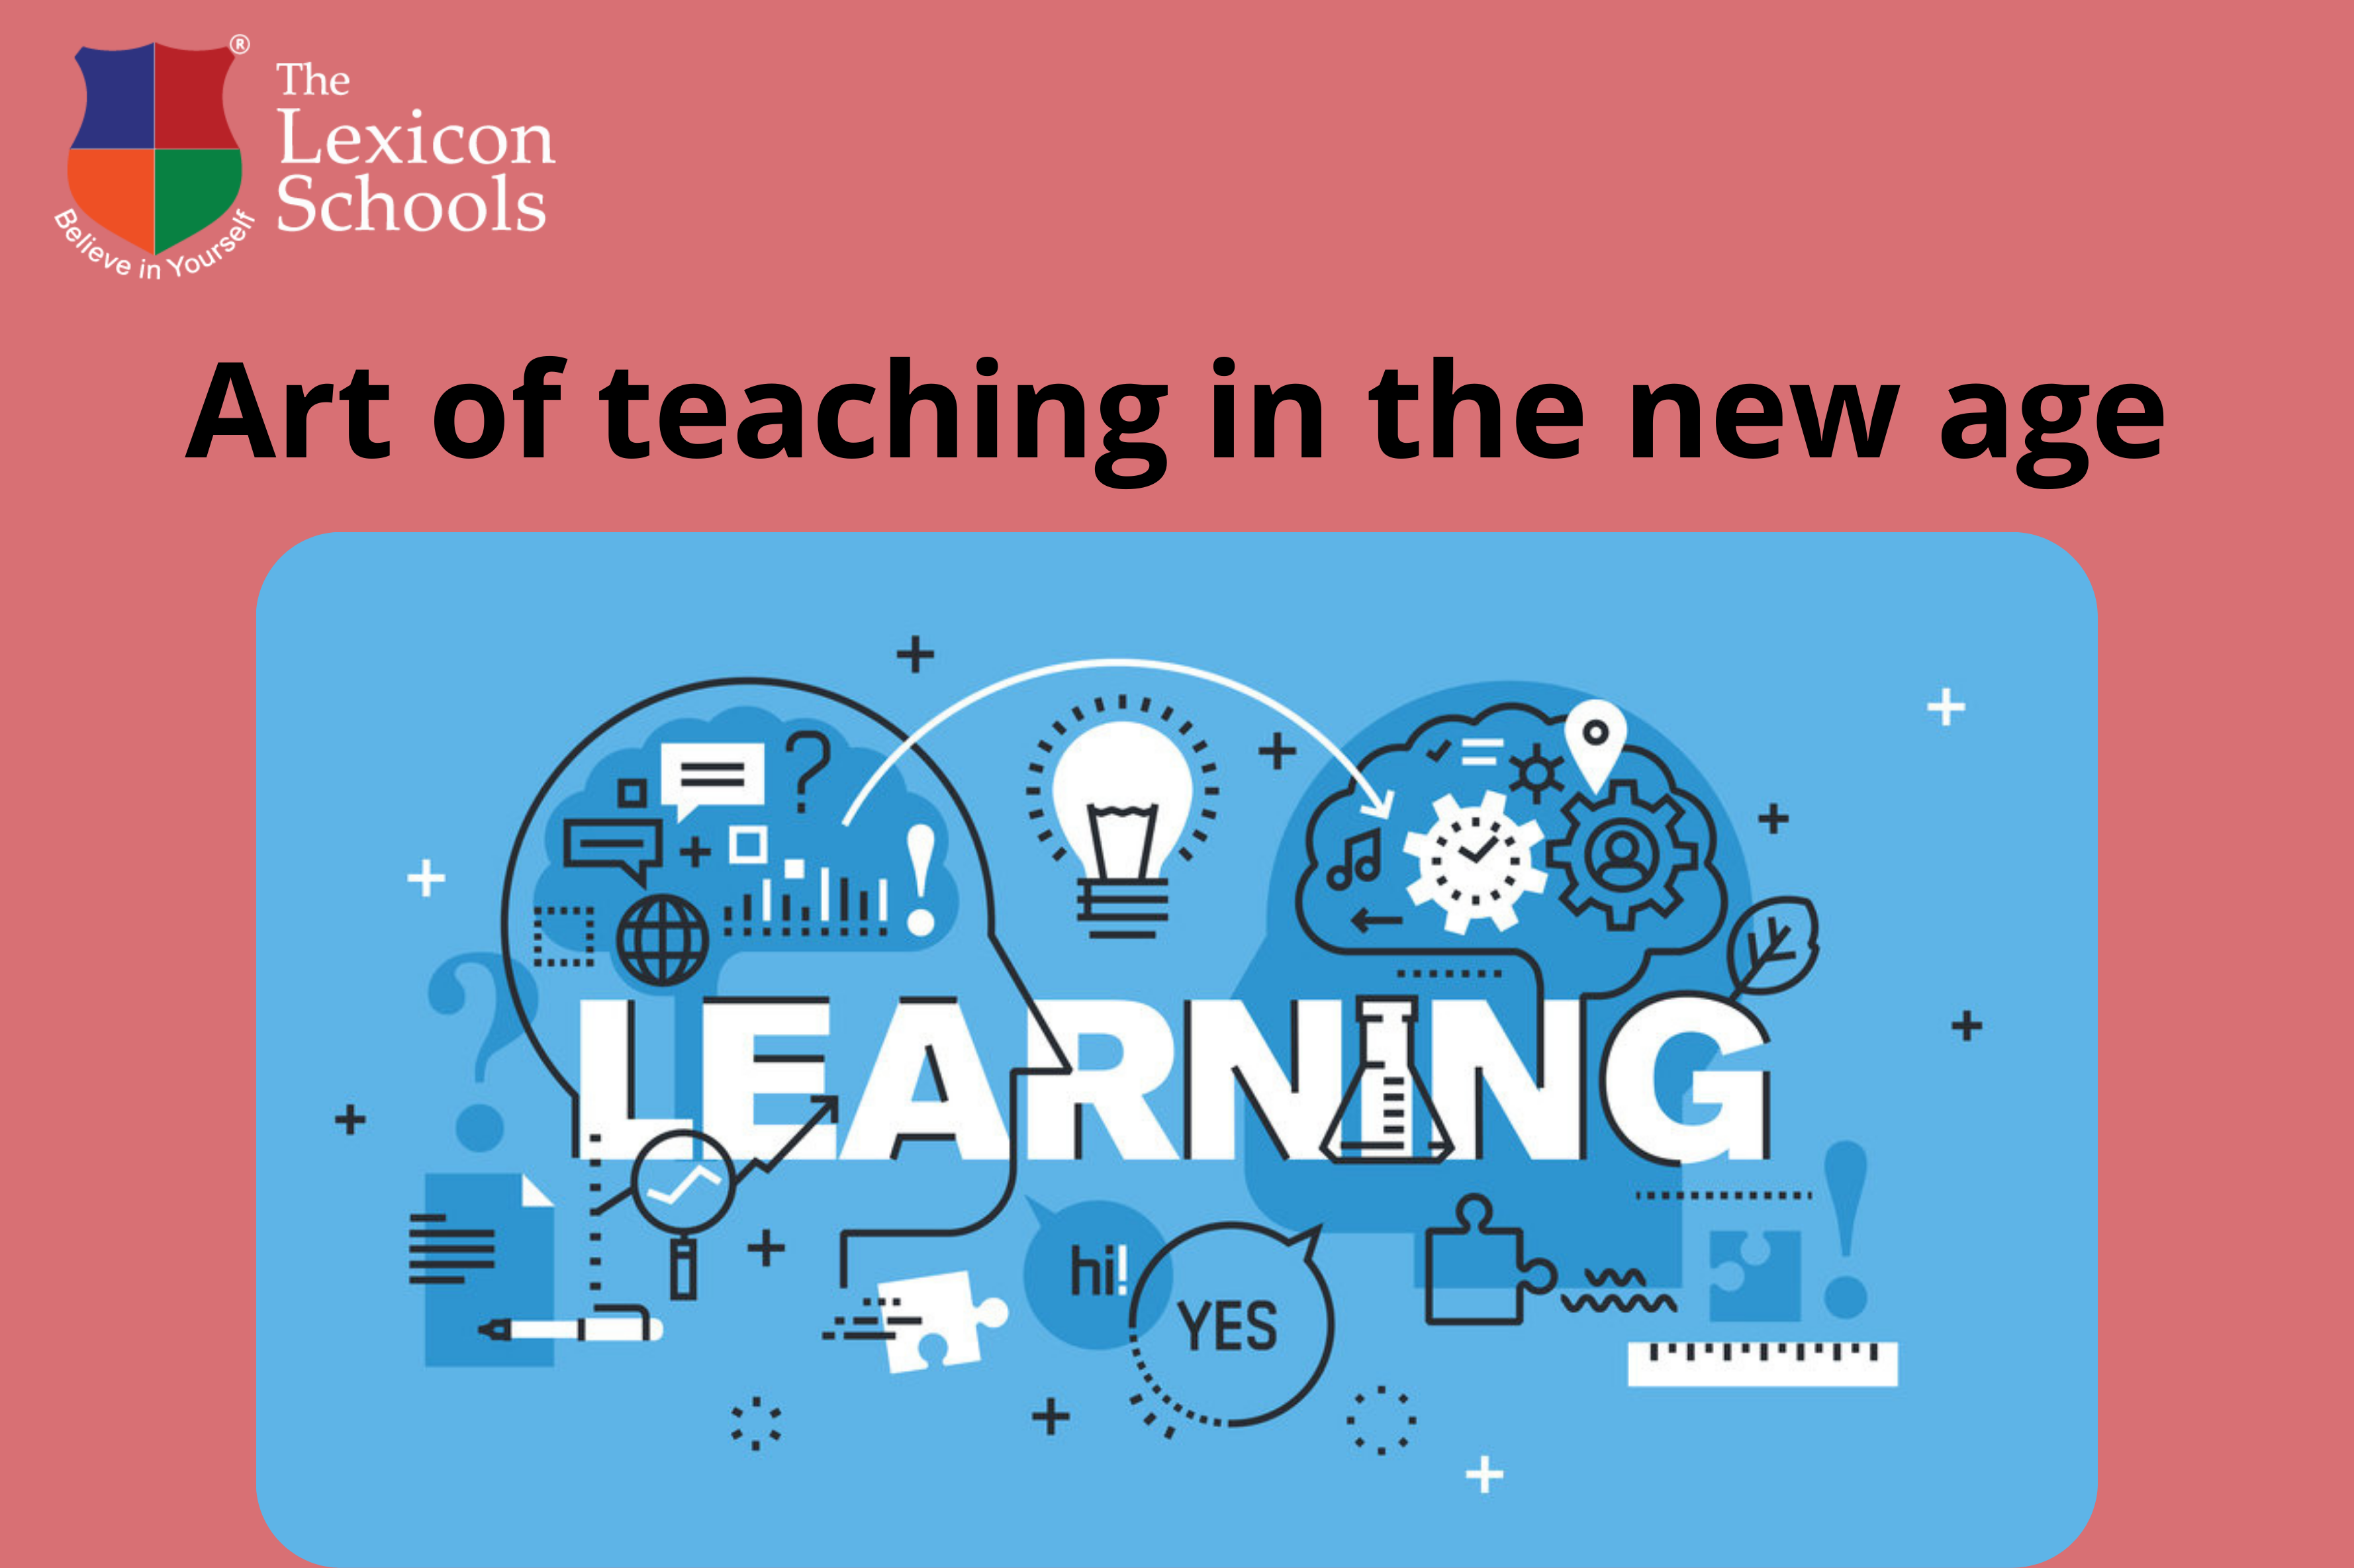 Art of teaching in the new age